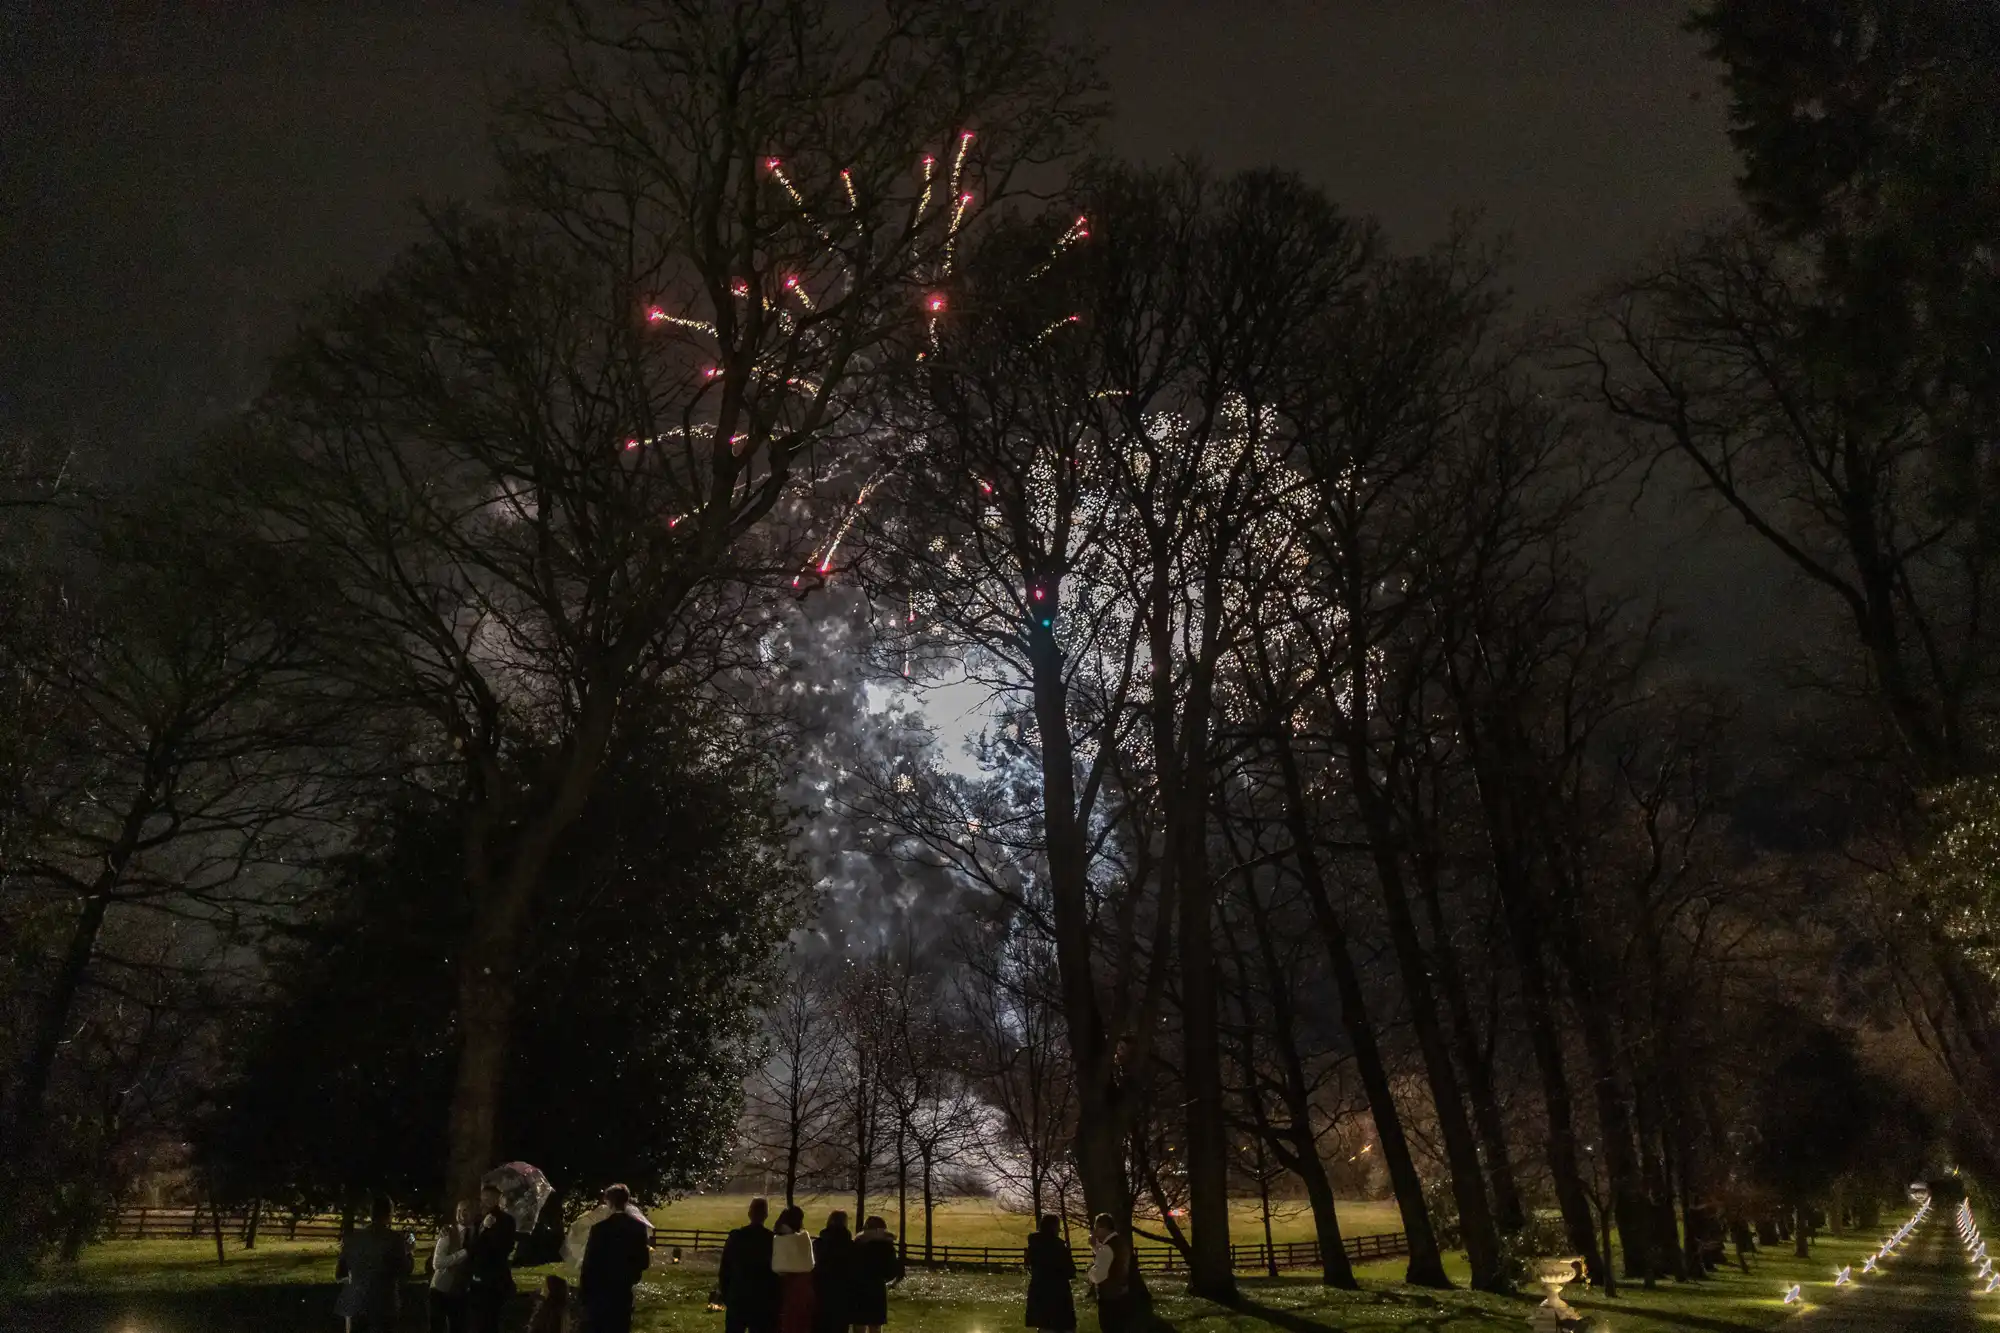 People watching fireworks through trees at night in a park.